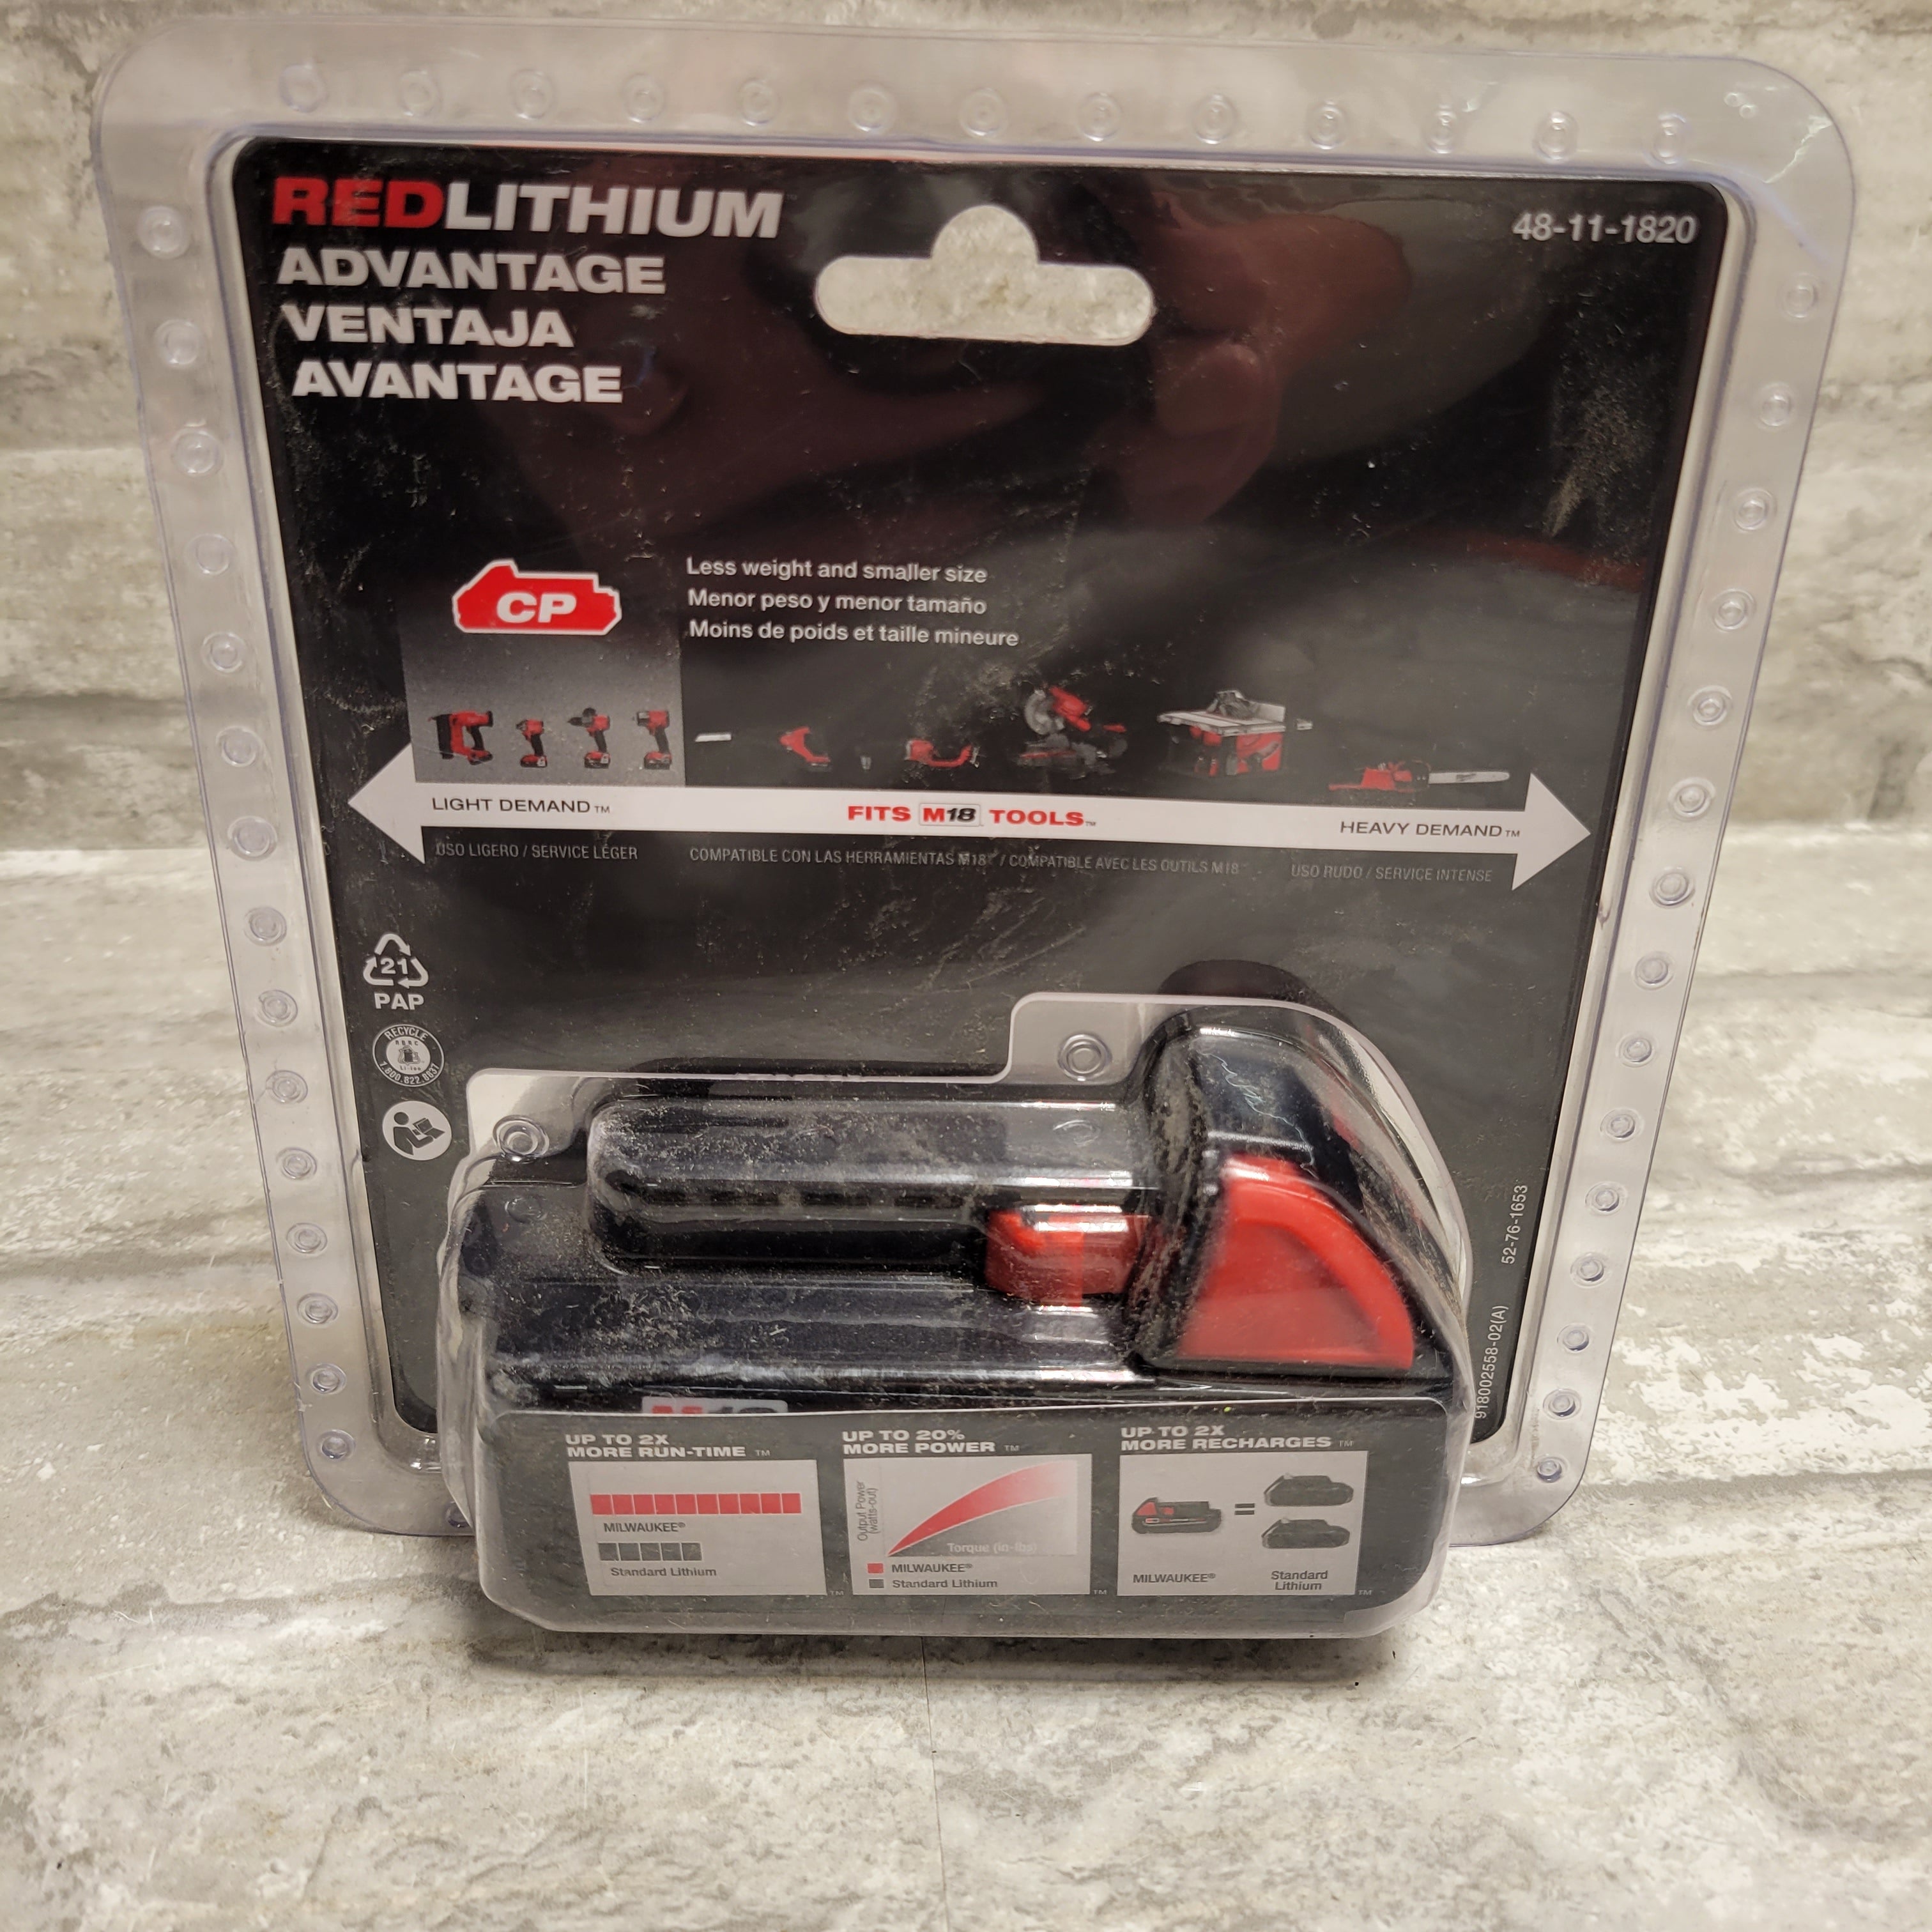 Milwaukee M18 18-Volt 2.0 Ah Lithium-Ion Compact Battery 48-11-1820 (8152421564654)